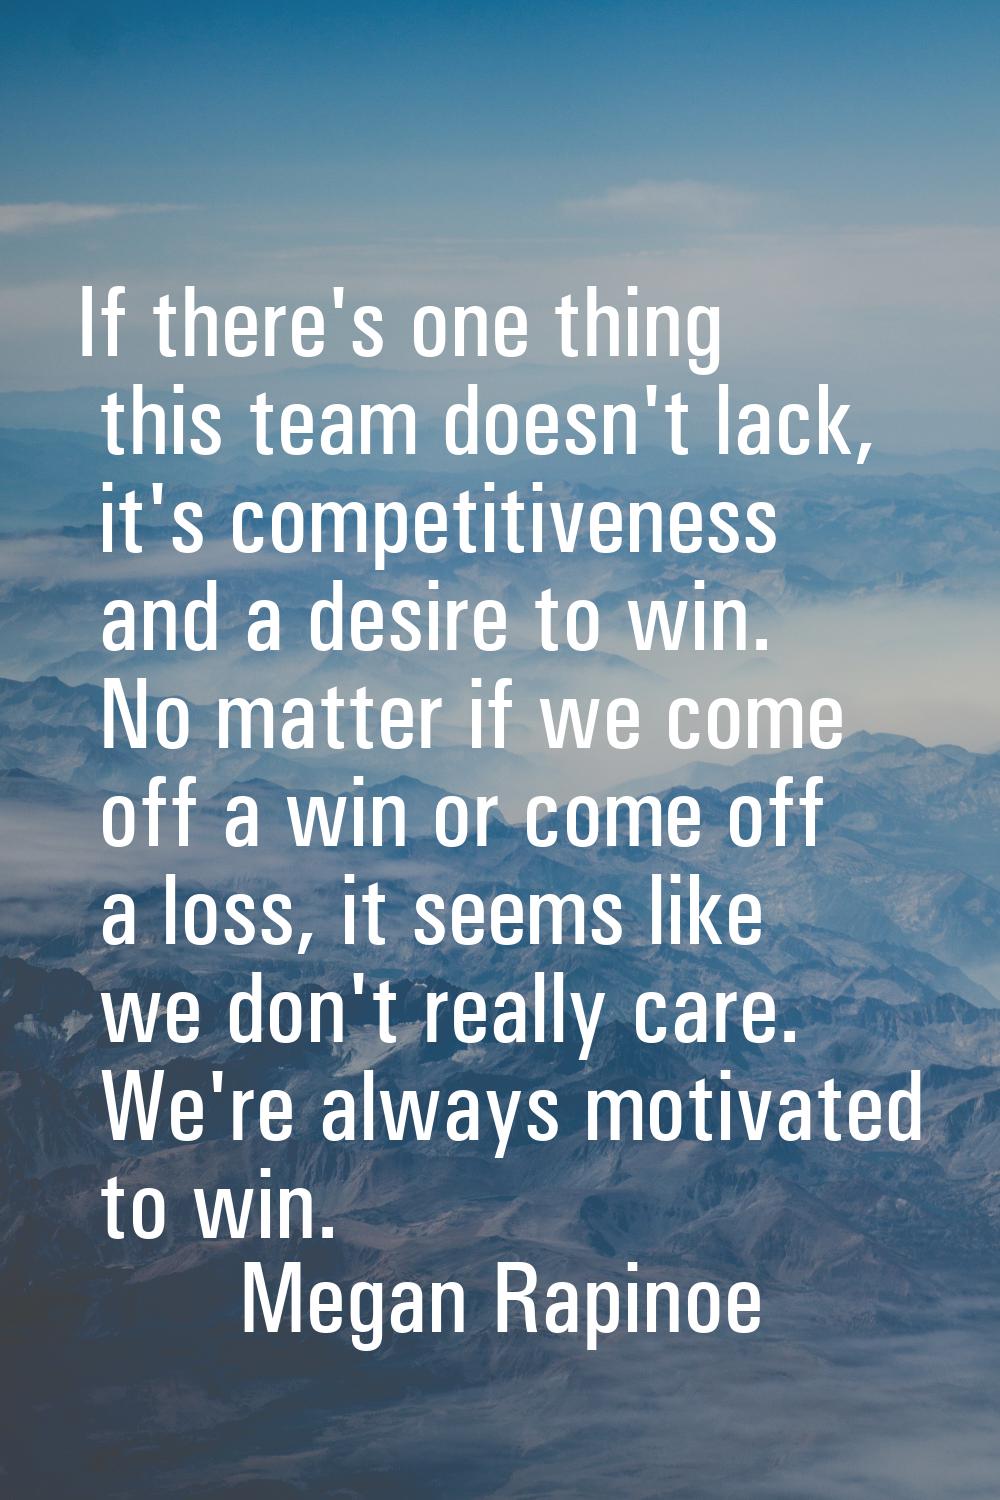 If there's one thing this team doesn't lack, it's competitiveness and a desire to win. No matter if